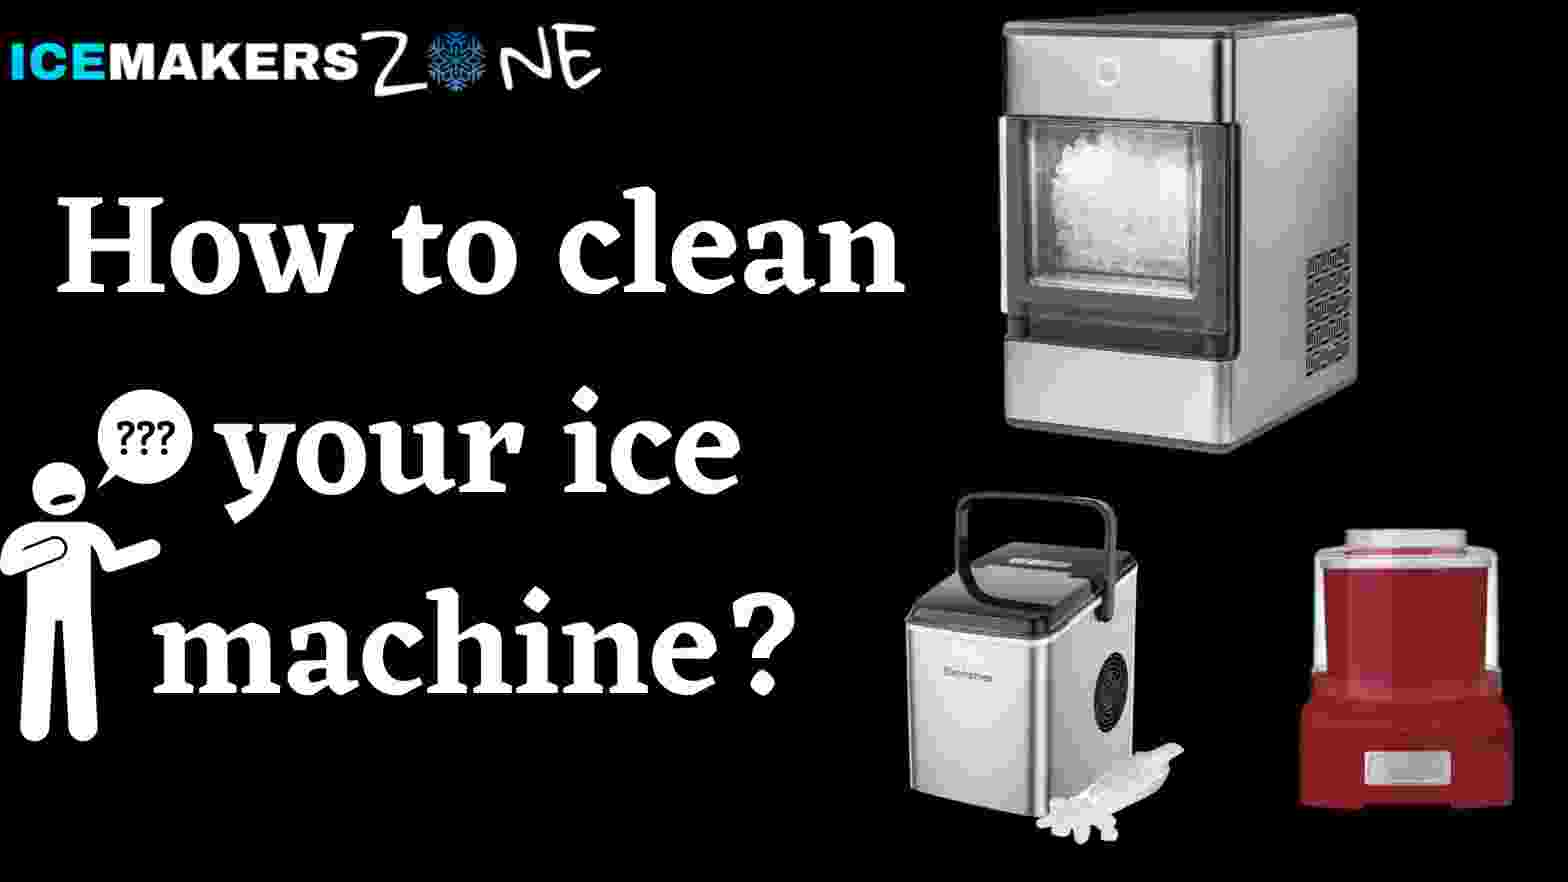 How to clean your ice maker